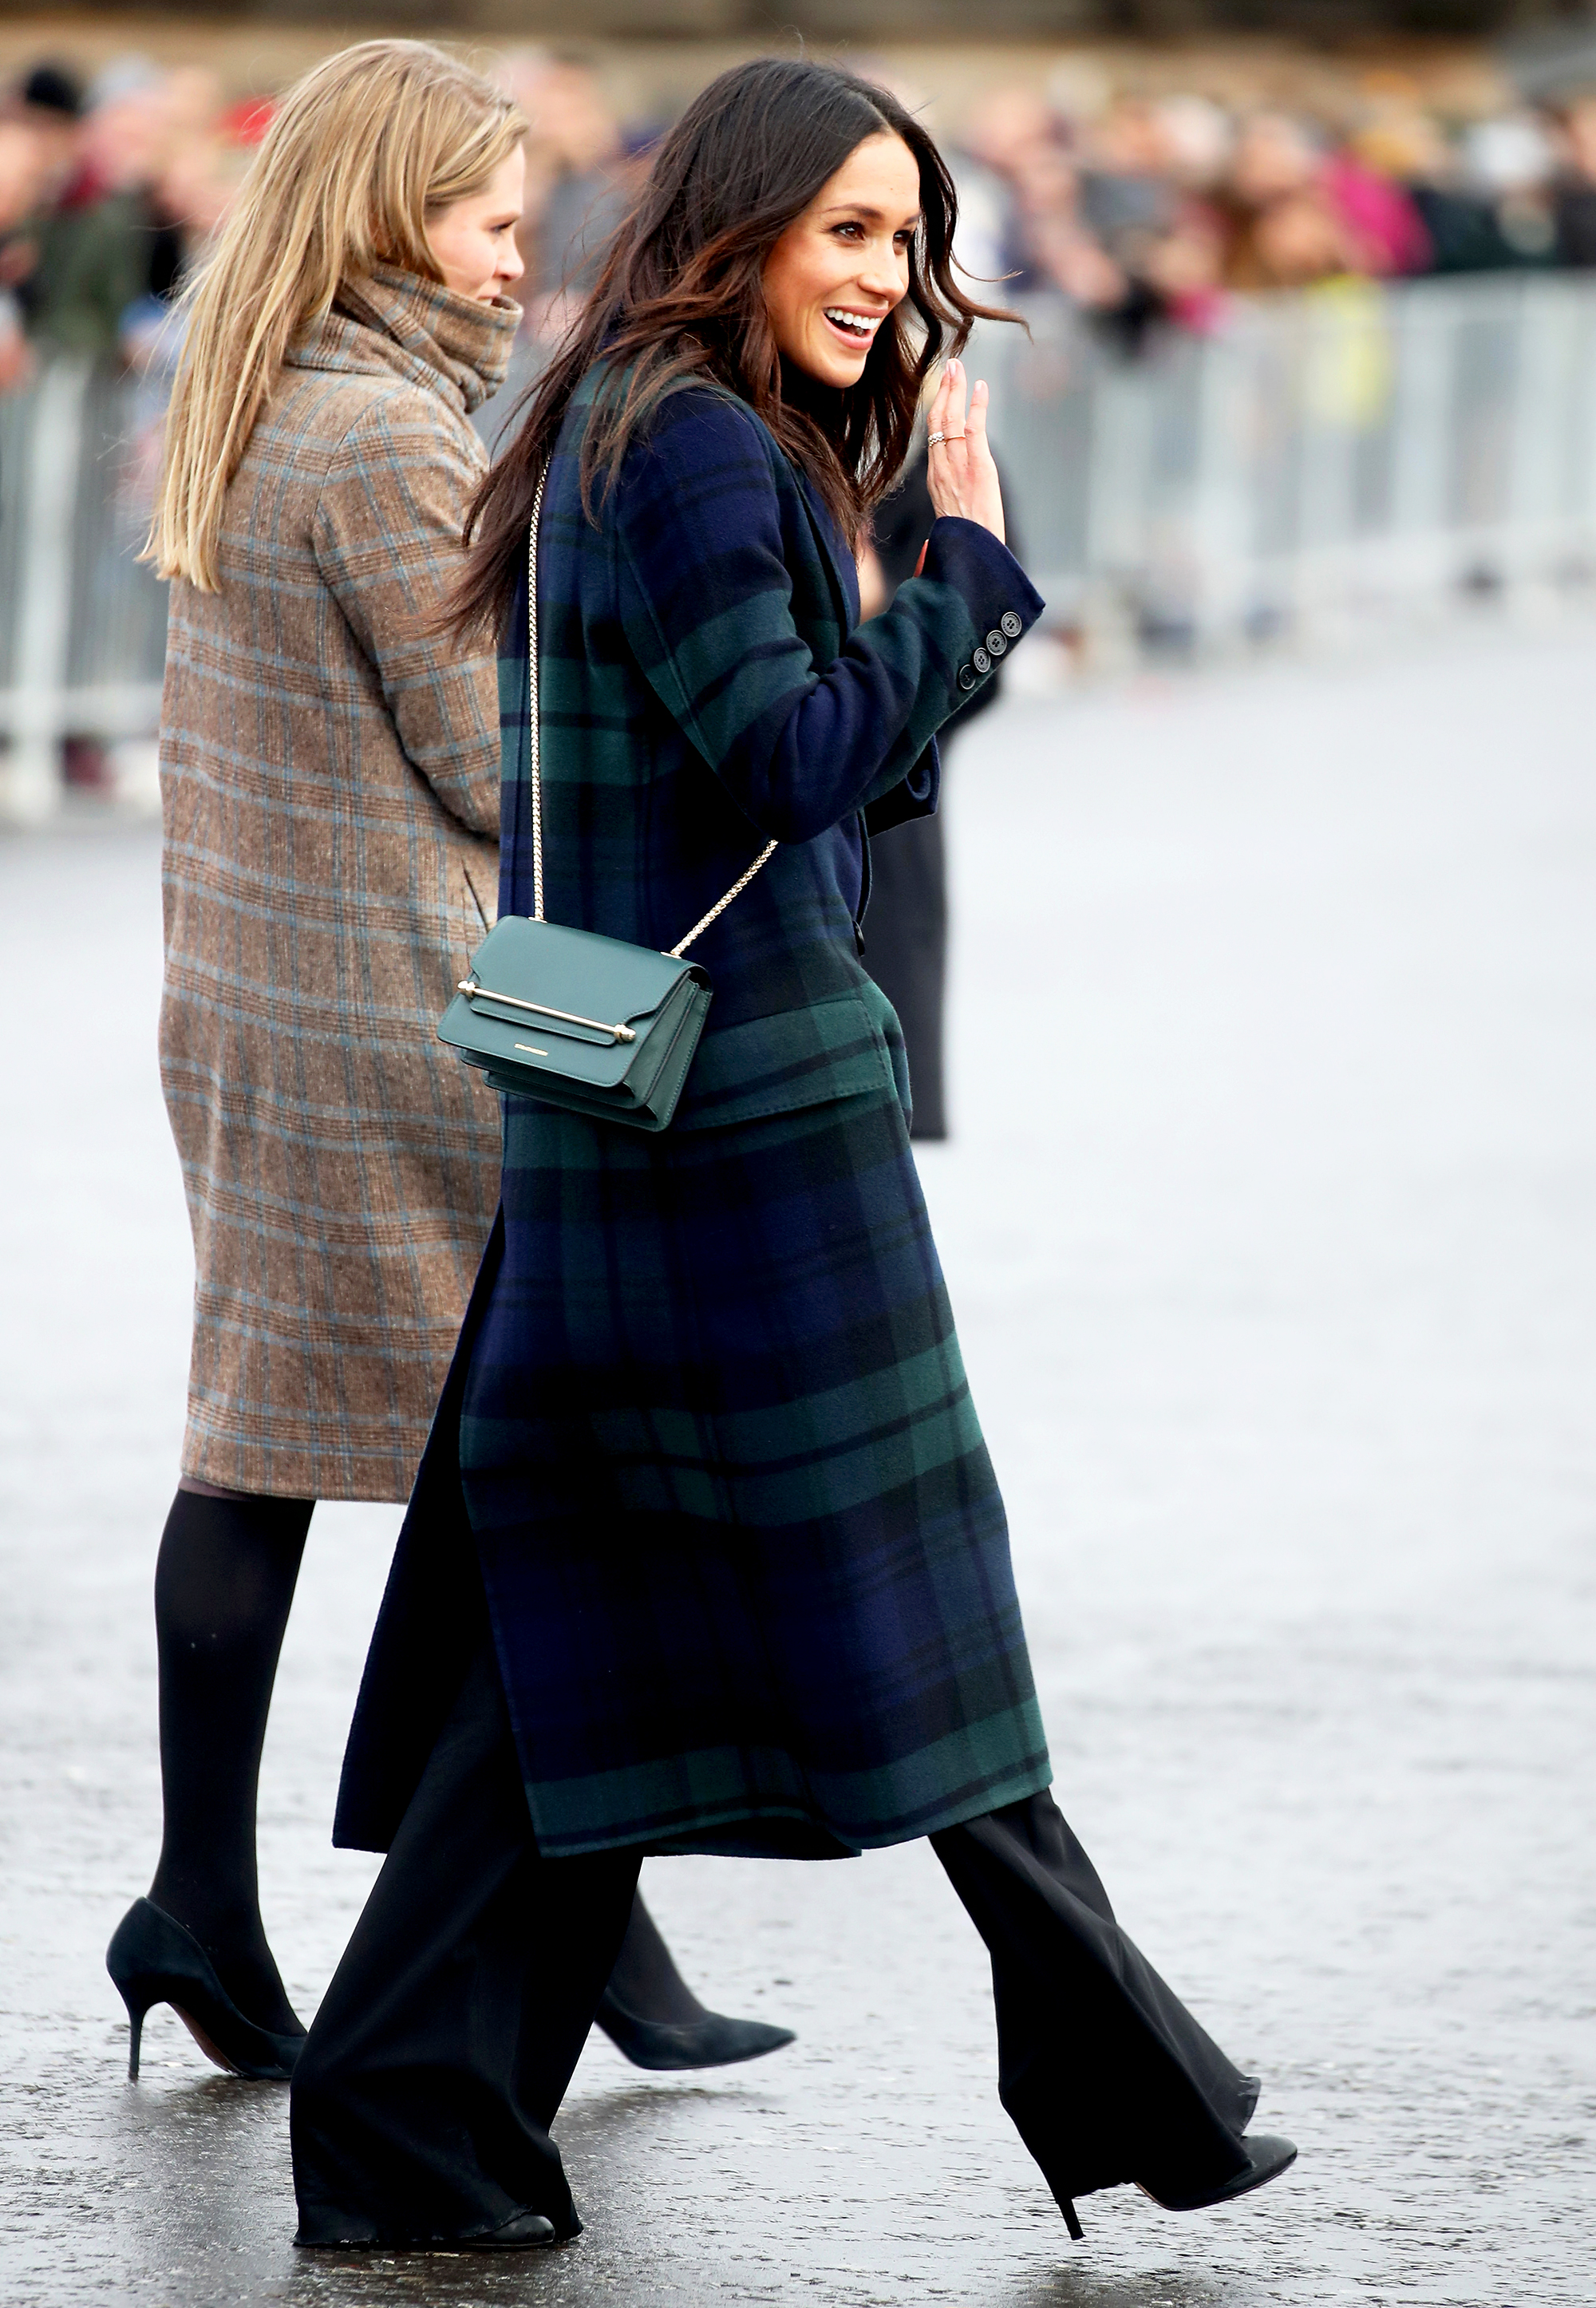 Meghan Markle in Burberry Coat, Strathberry Bag in Scotland: Shop